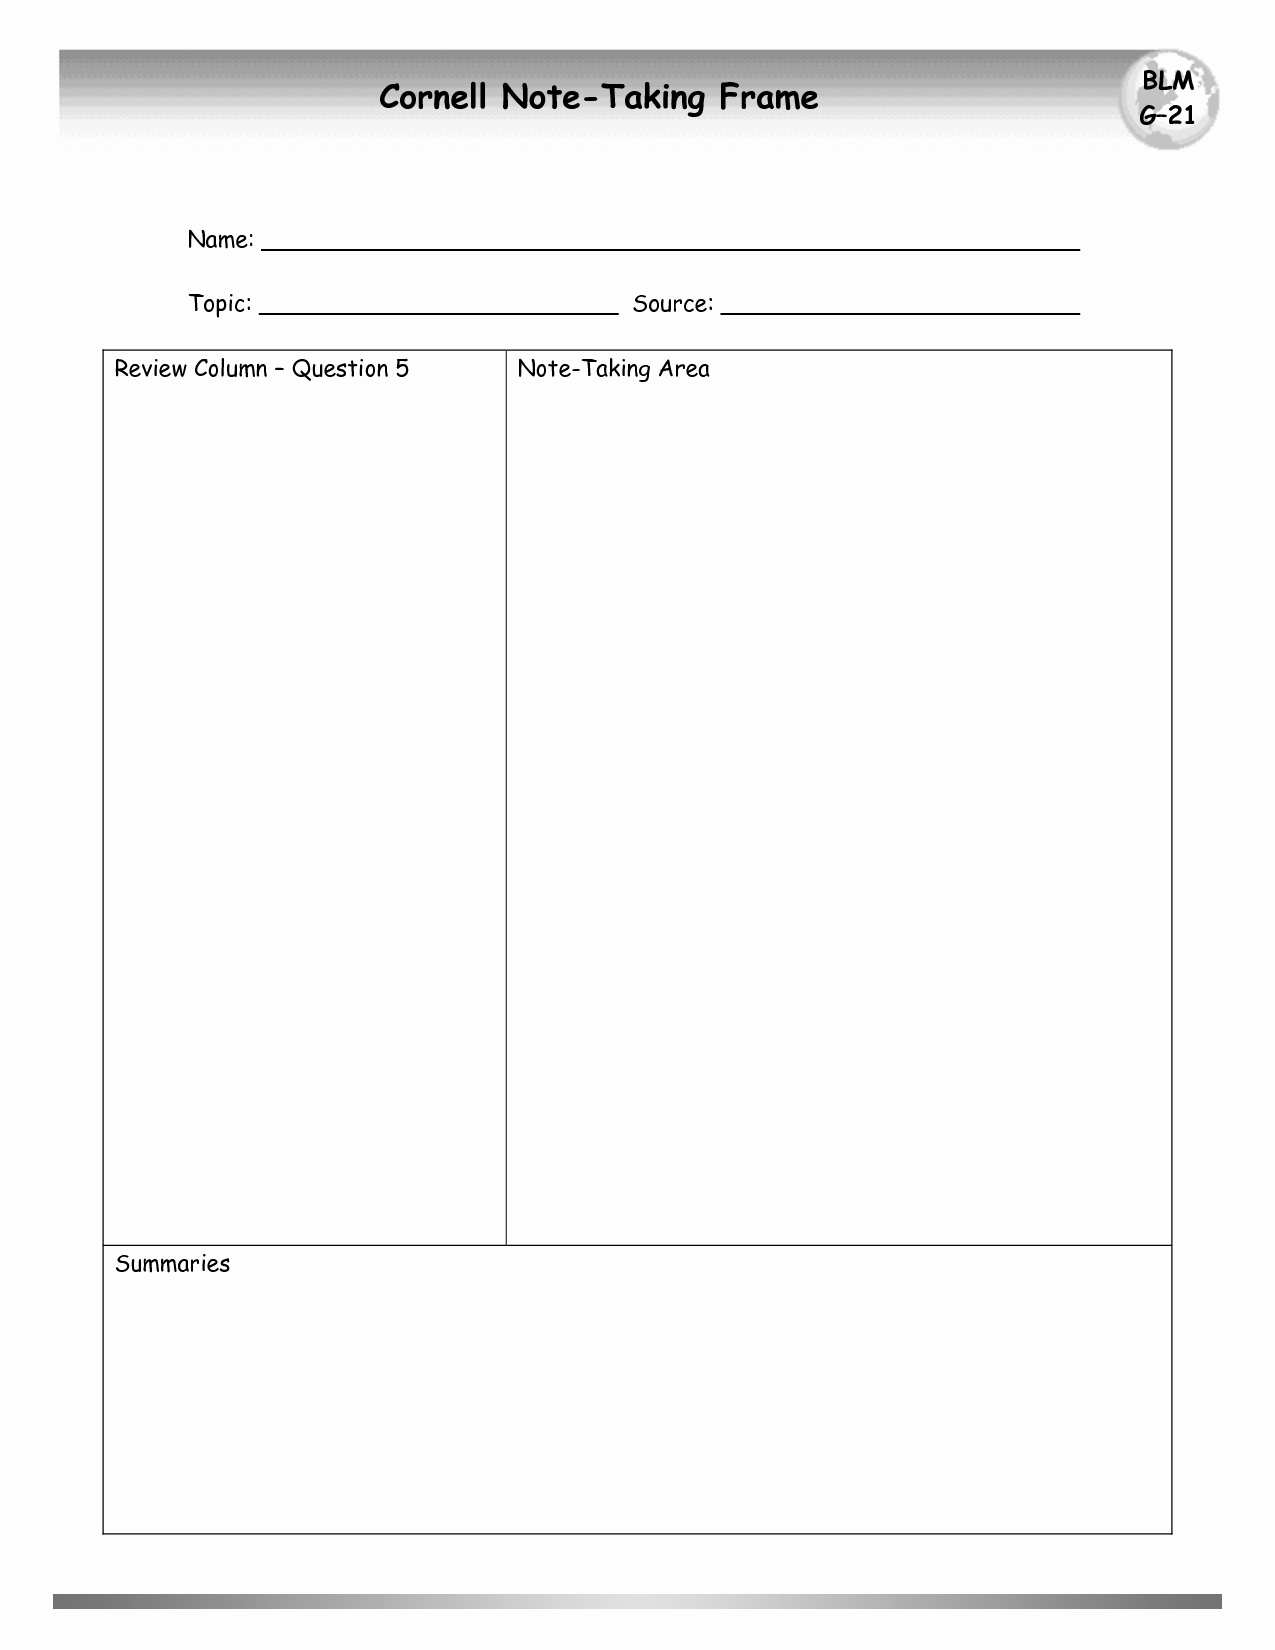 Note Taking Template Word Lovely 9 Best Of Cornell Note Taking Template Word